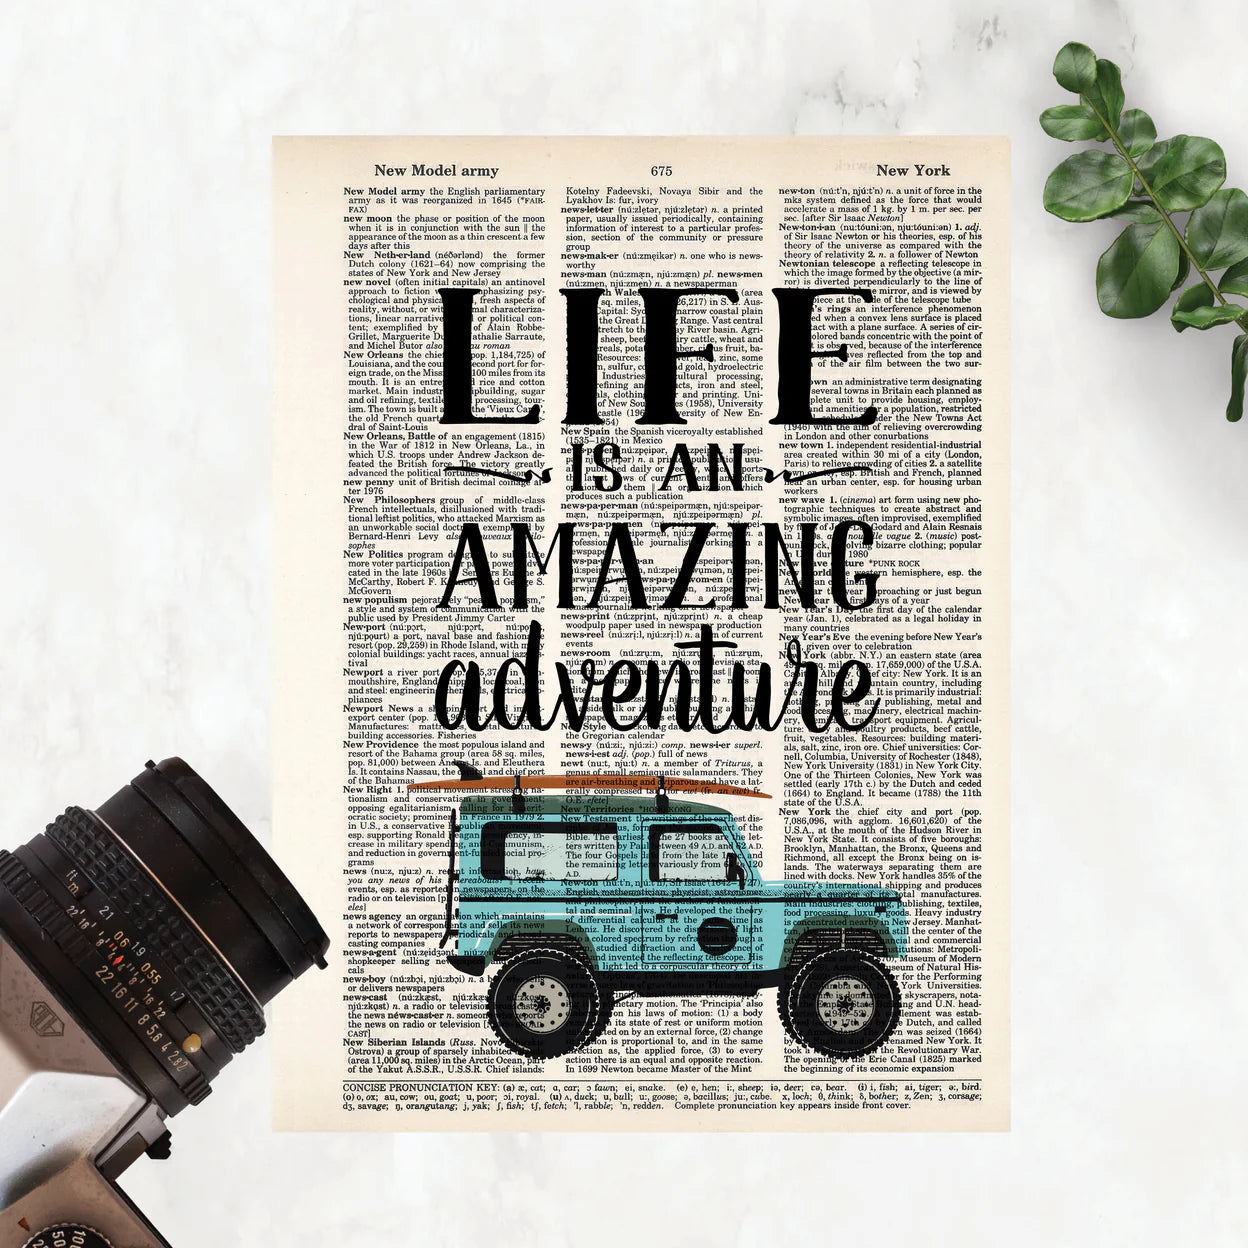 Life Quotes Dictionary Page Print